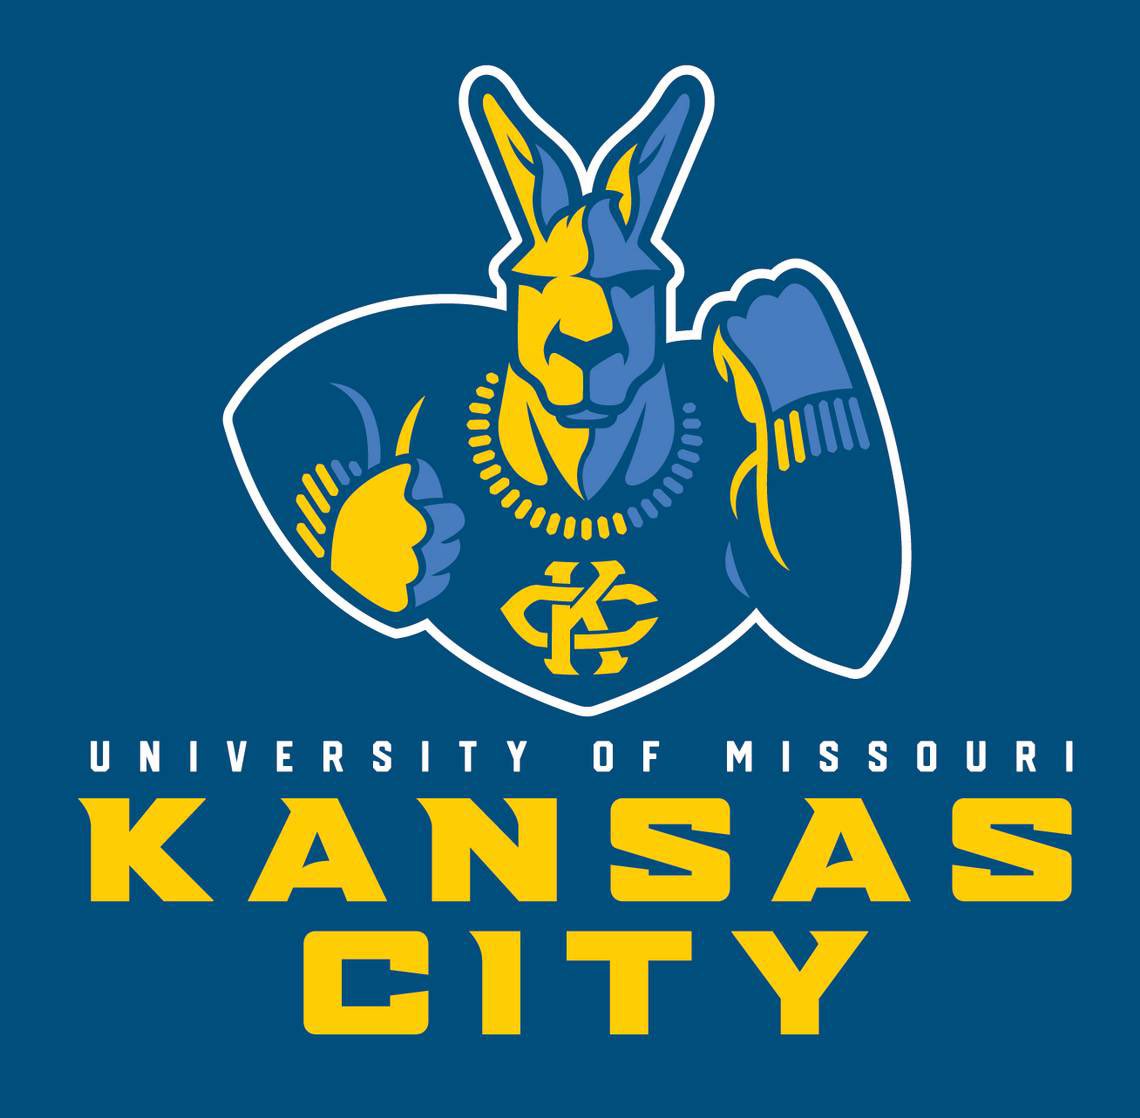 After a great visit I’m blessed to receive an offer from @KCRoosTrackXC